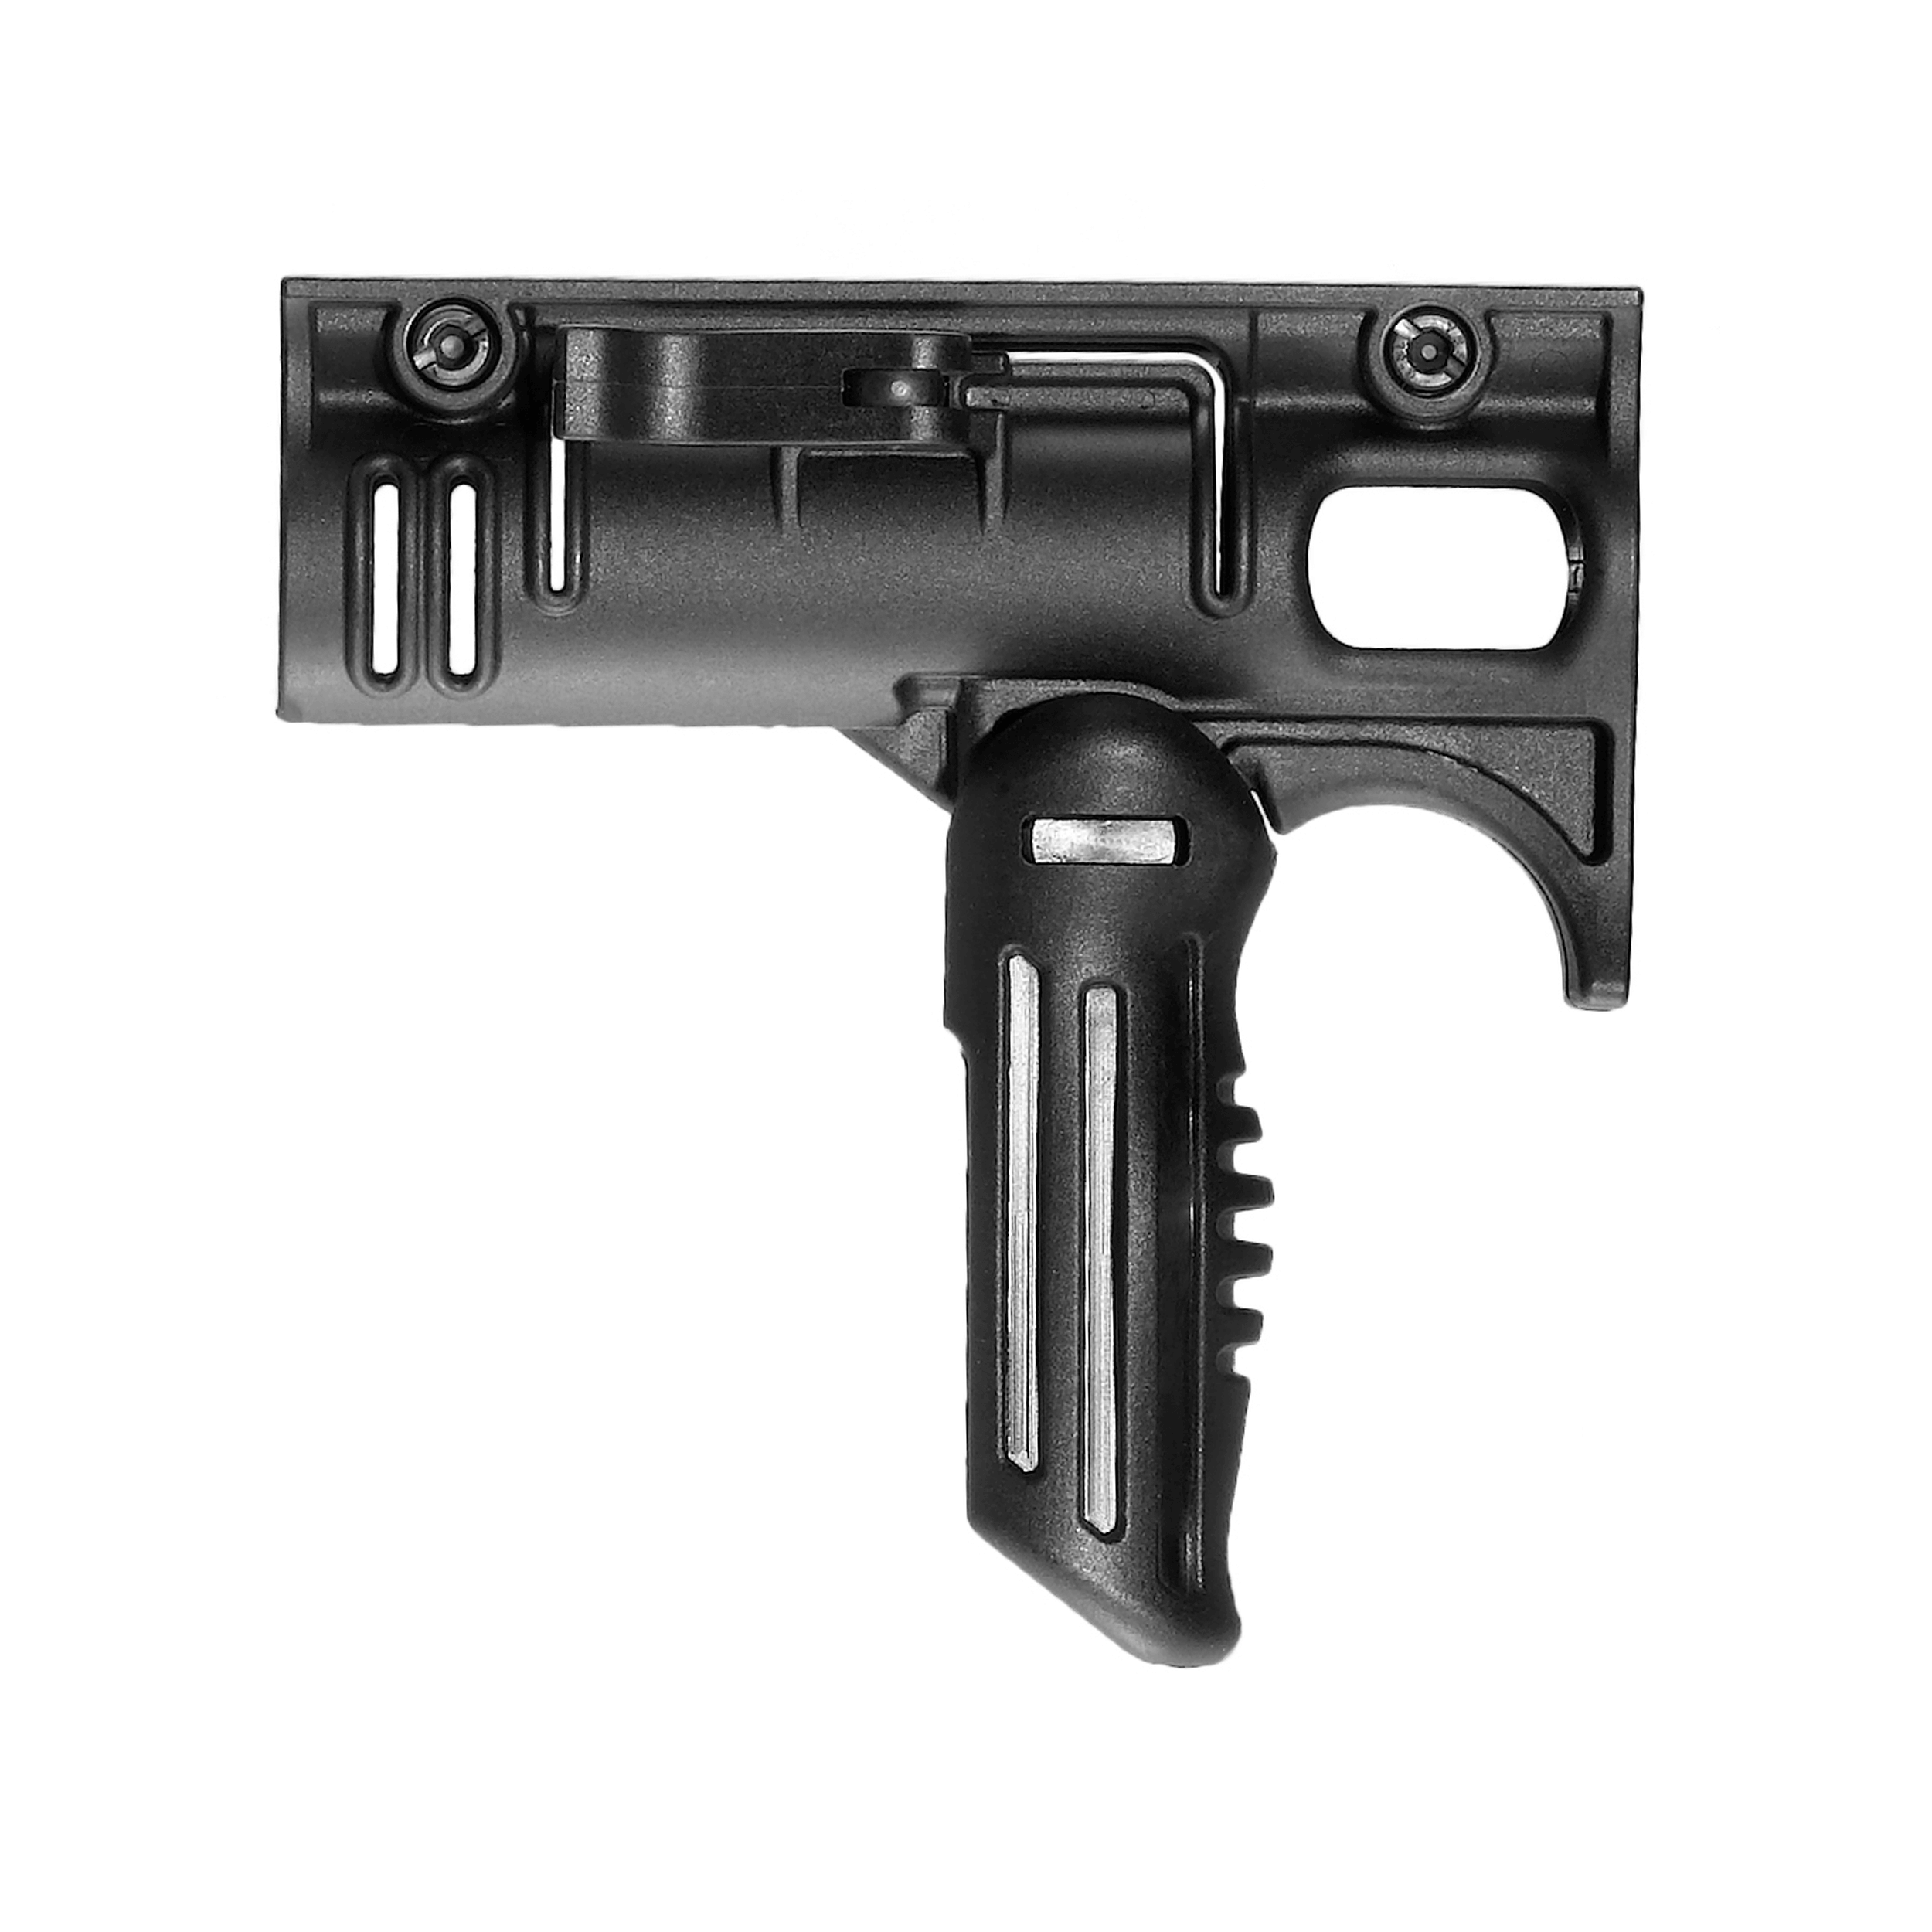 Two-Position Foregrip & Flashlight Mount